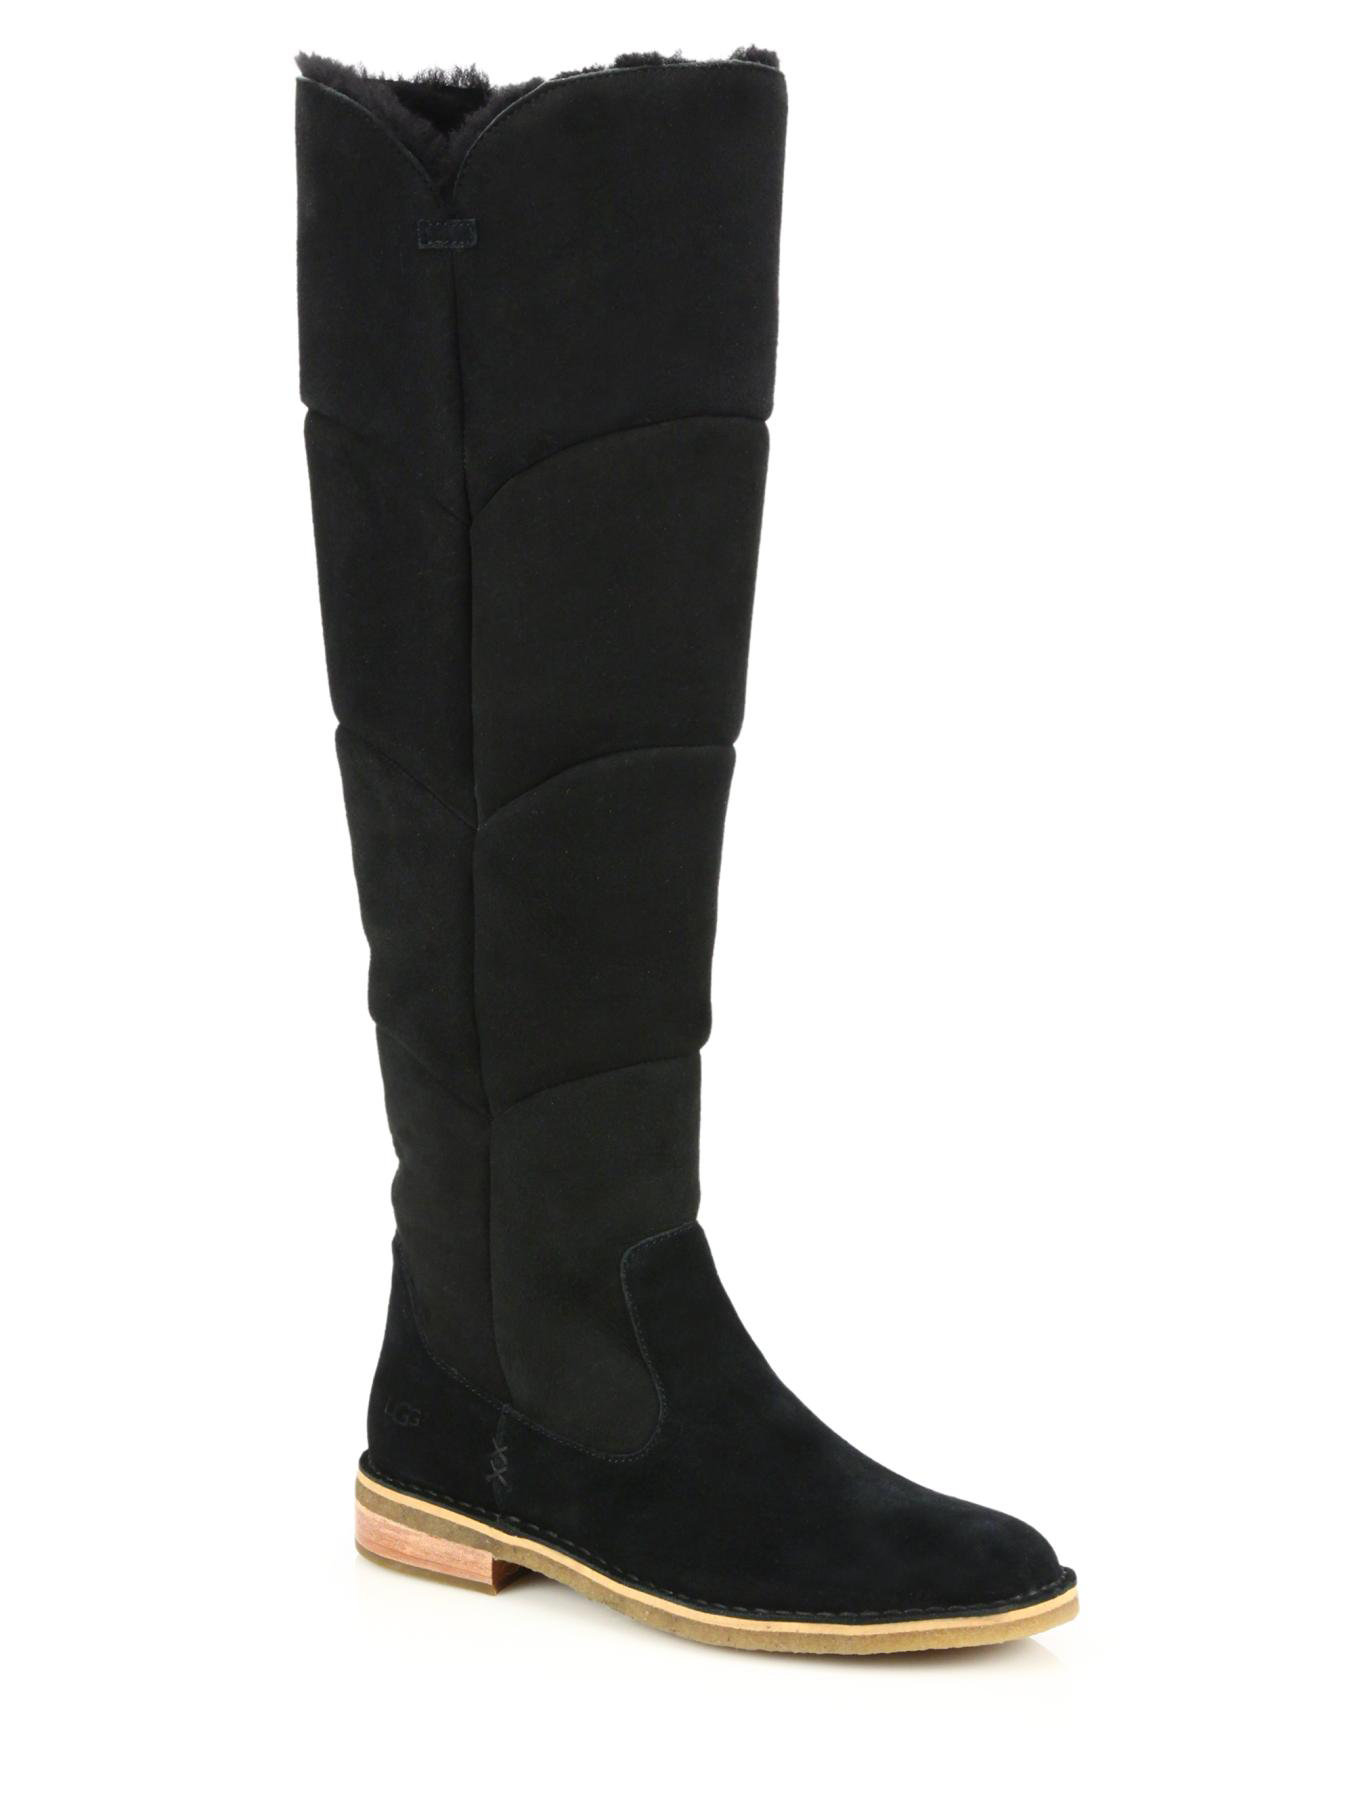 Ugg Samantha Shearling-lined Suede Knee Boots in Black | Lyst